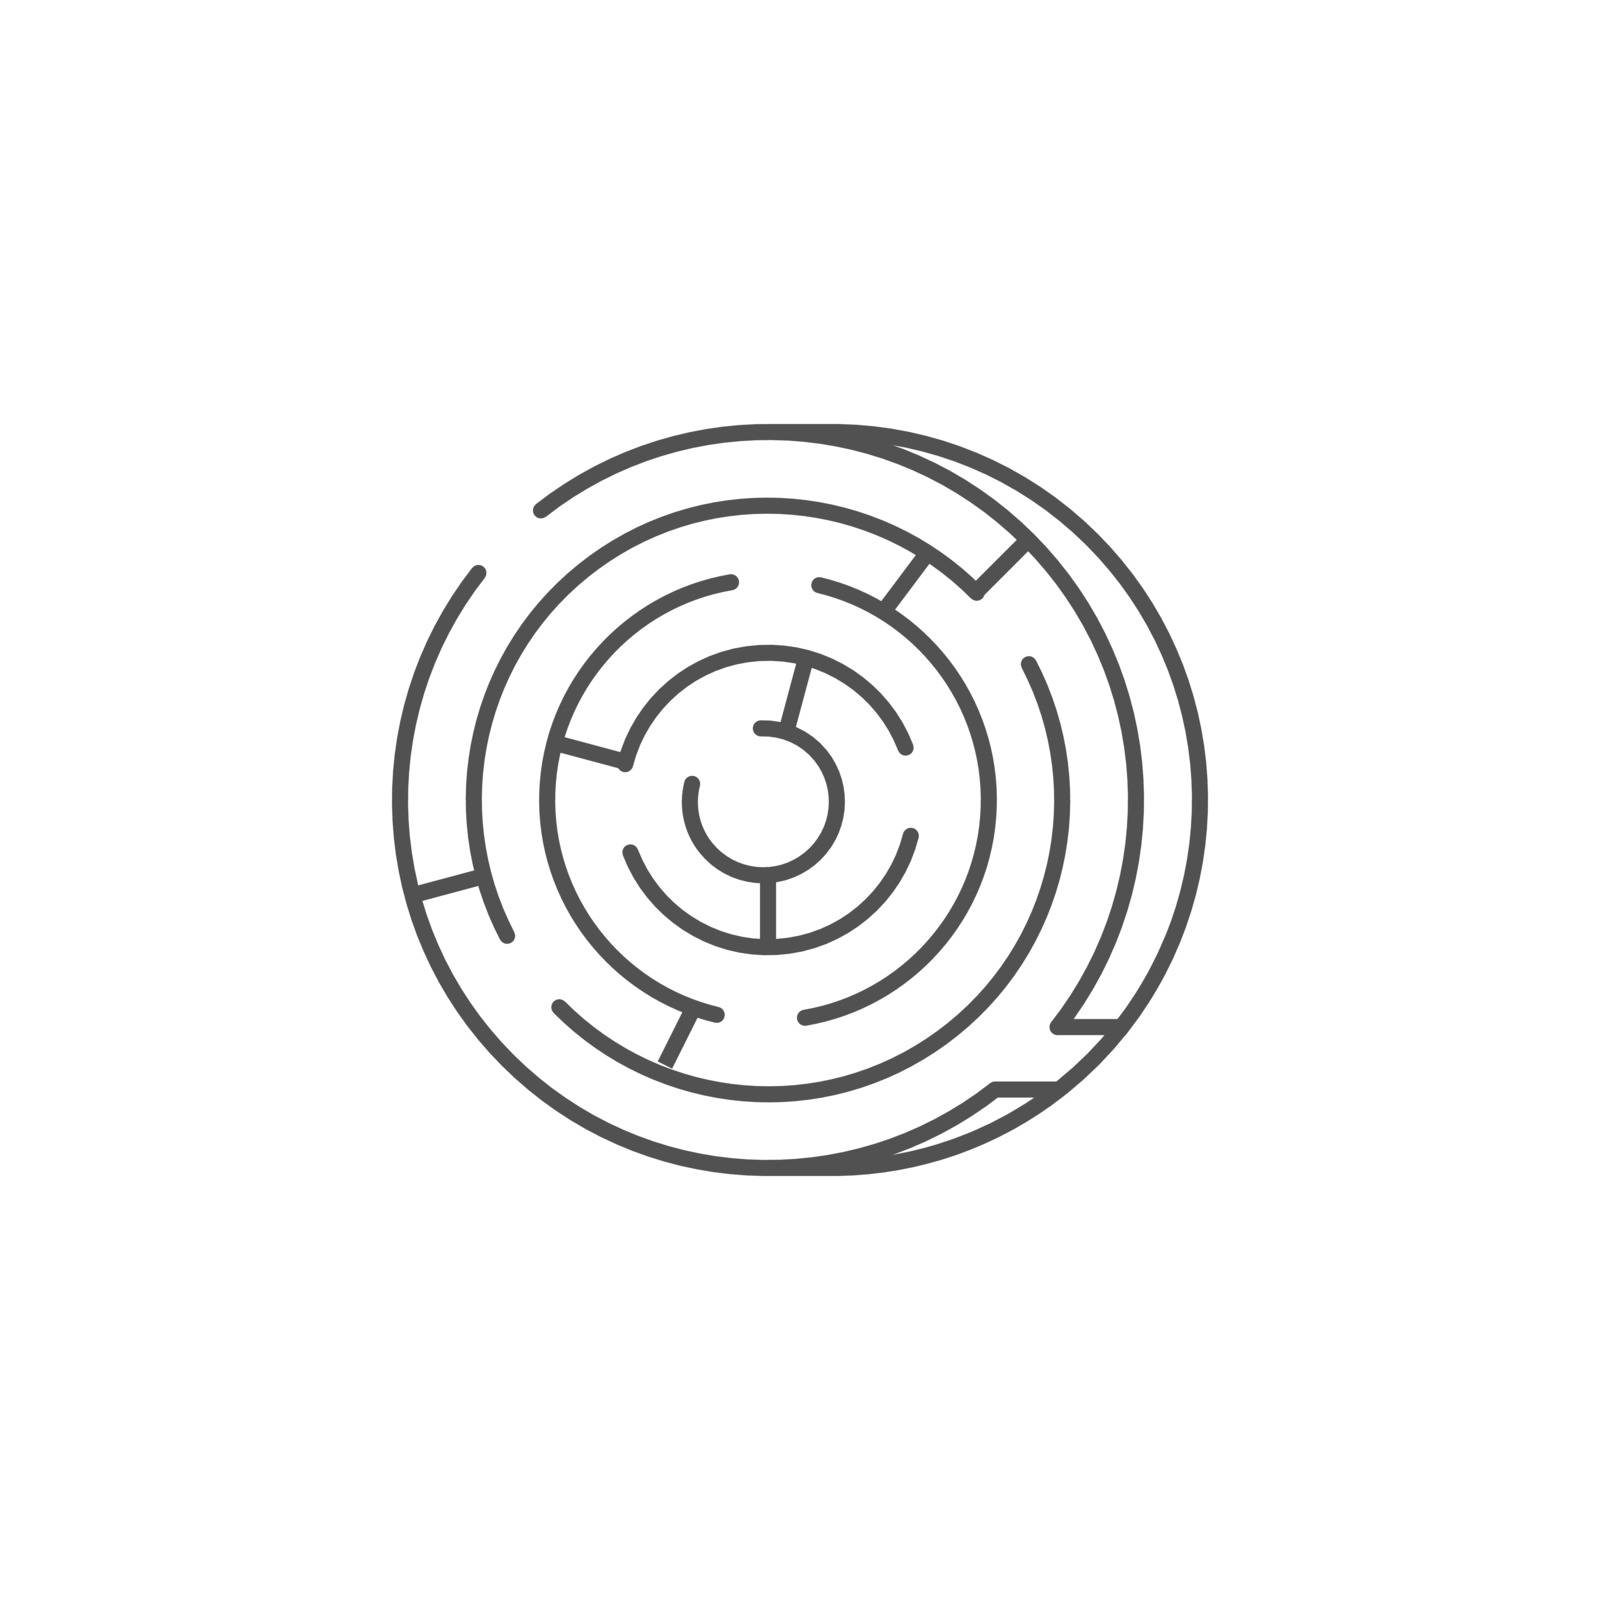 Labyrinth Icon. Labyrinth Thin Line Vector Icon. Flat icon isolated on the white background. Editable EPS file. Vector illustration.